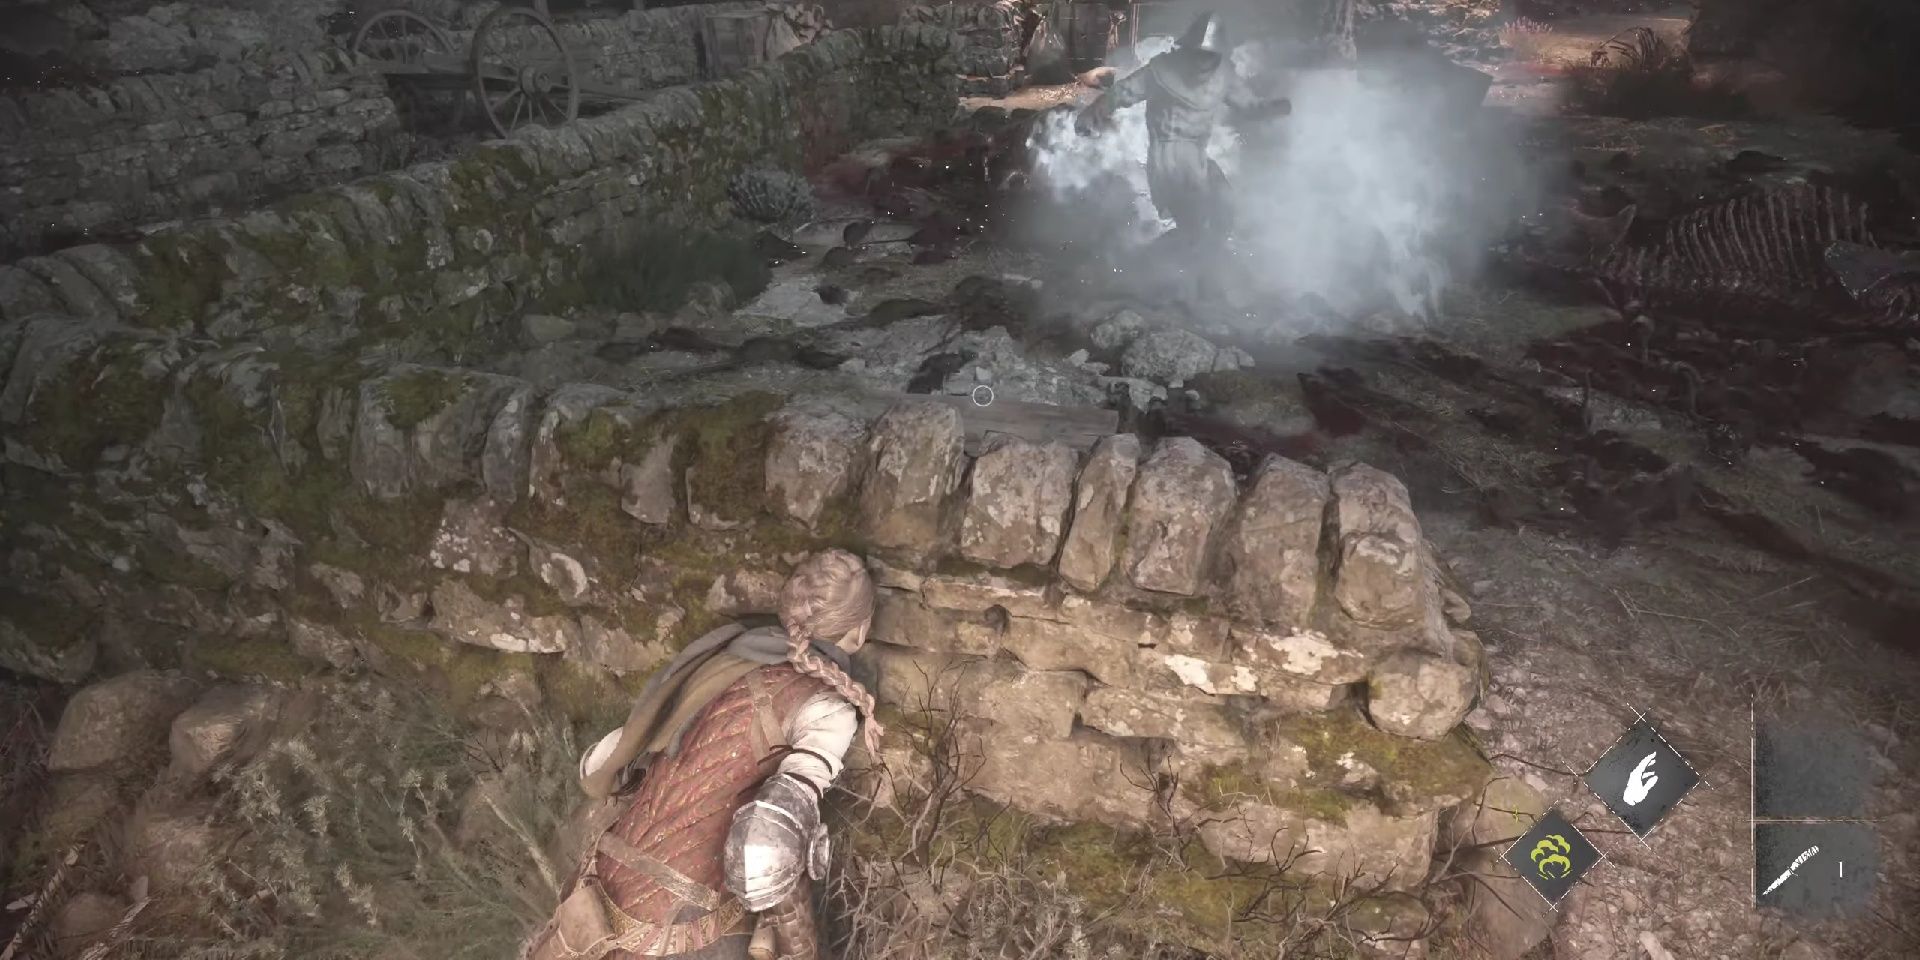 Player using the exstingui sling on an enemy to feed them to rats in A Plague Tale: Requiem.